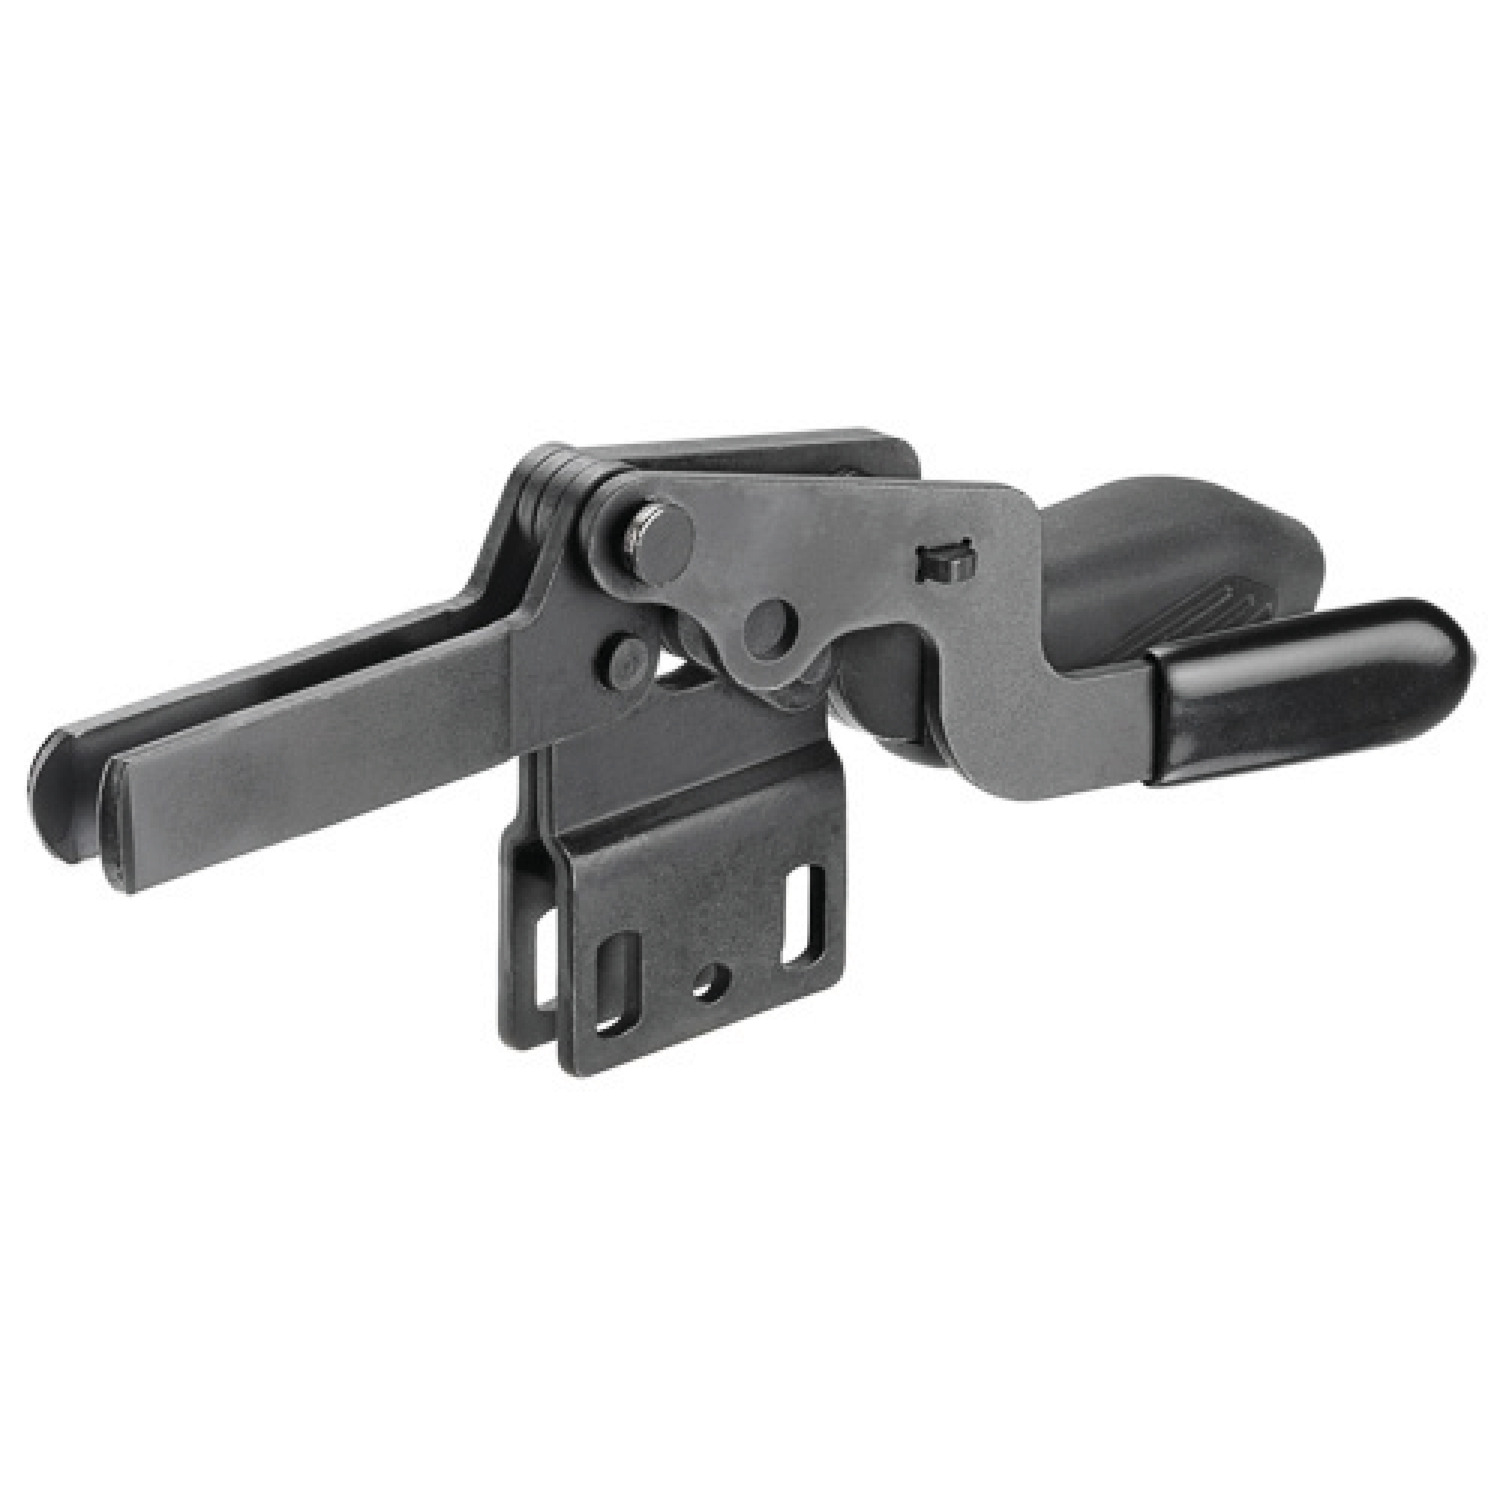 Product 41064.1, Horizontal Acting Toggle Clamps black - open arm - vertical base - safety / 